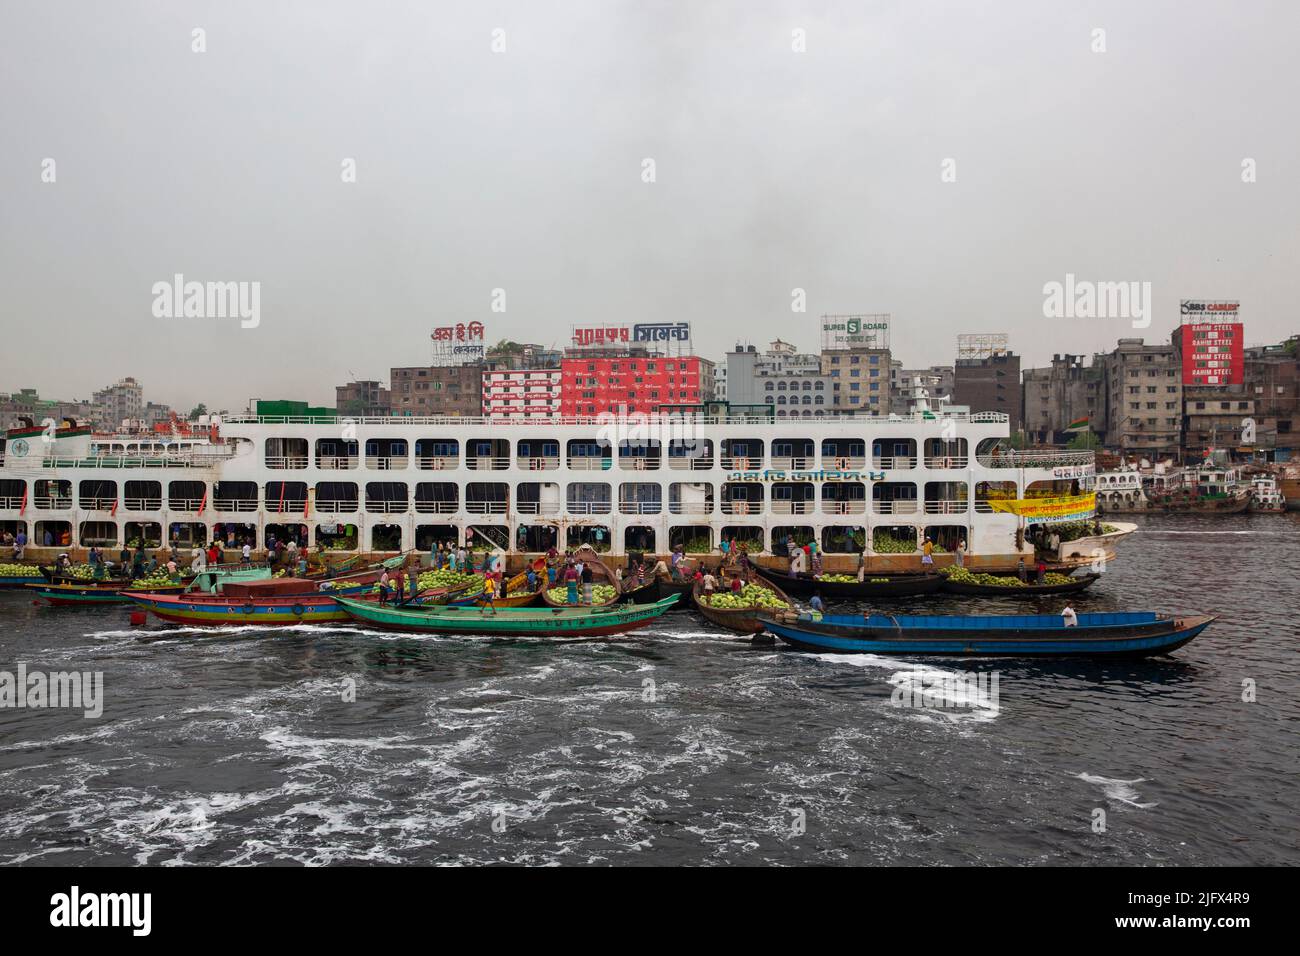 Watermelon unloaded from big vessel to small boat on the Buriganga River in Old Dhaka, Bangladesh Stock Photo